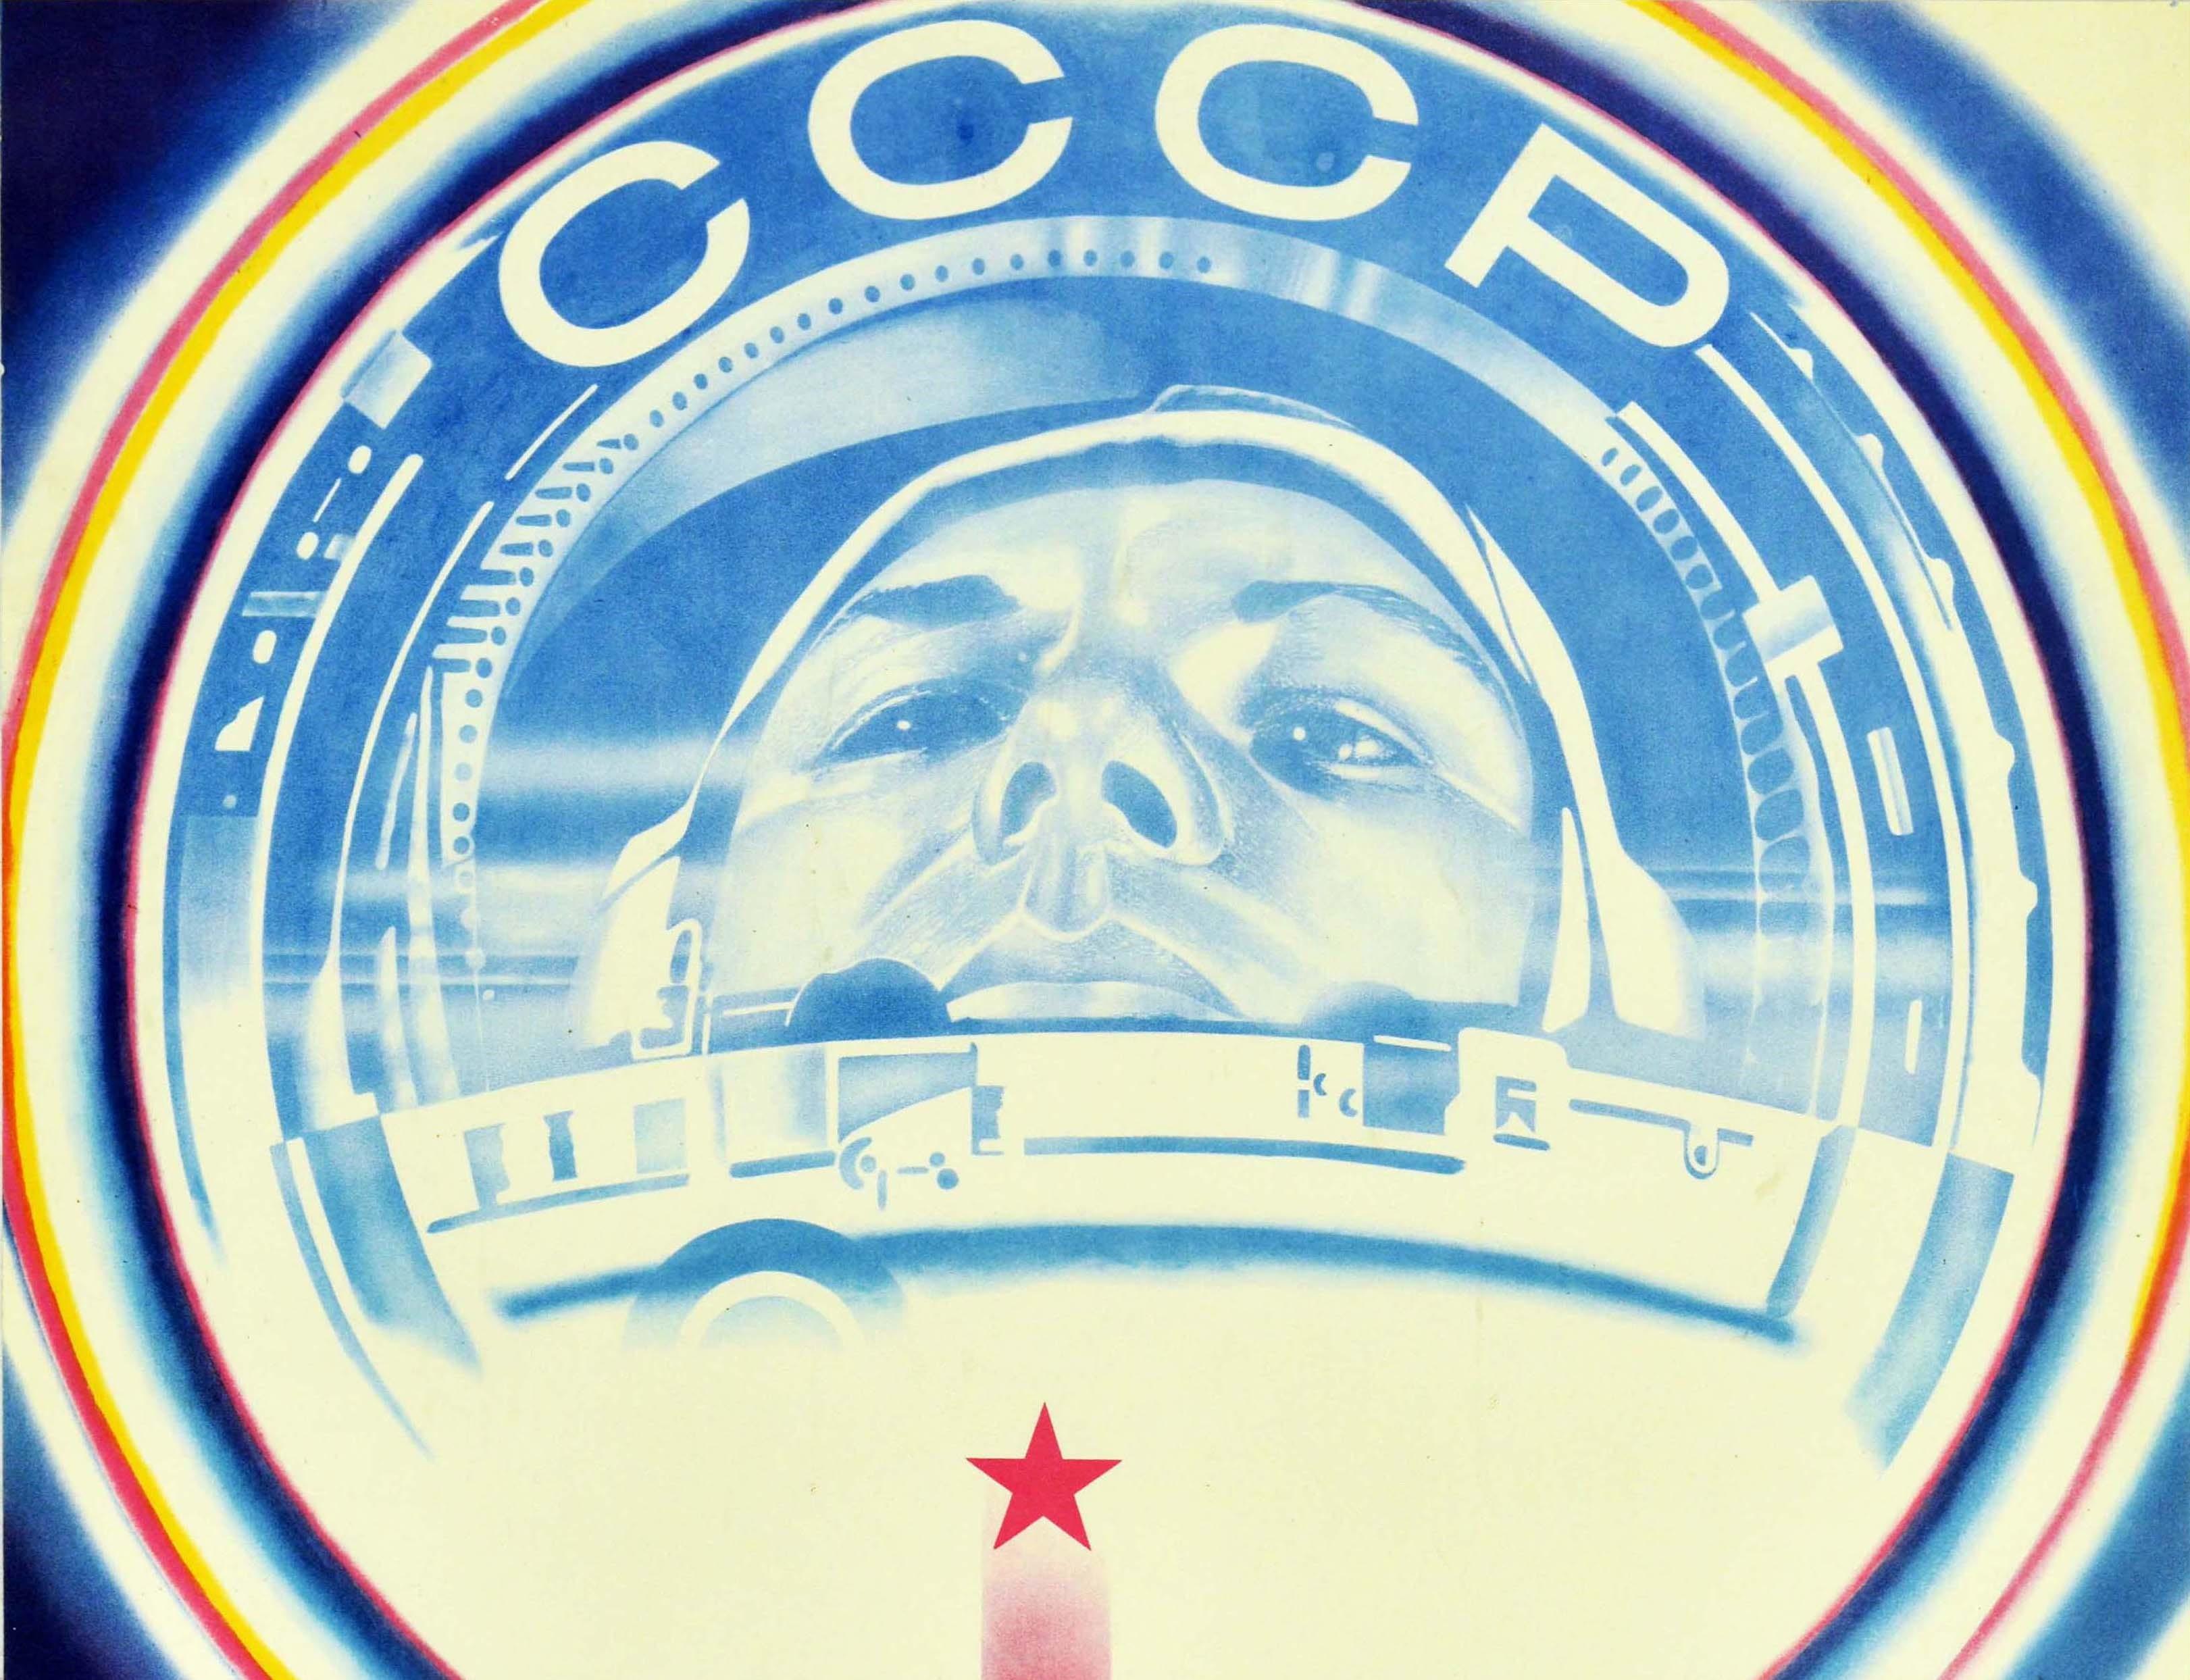 Original vintage Soviet propaganda poster - The era of October the era of great achievements / ??? ??????? ??? ??????? ????????? - featuring a cosmonaut with CCCP on his helmet above scientific computer code on punch cards like skyscrapers rising to